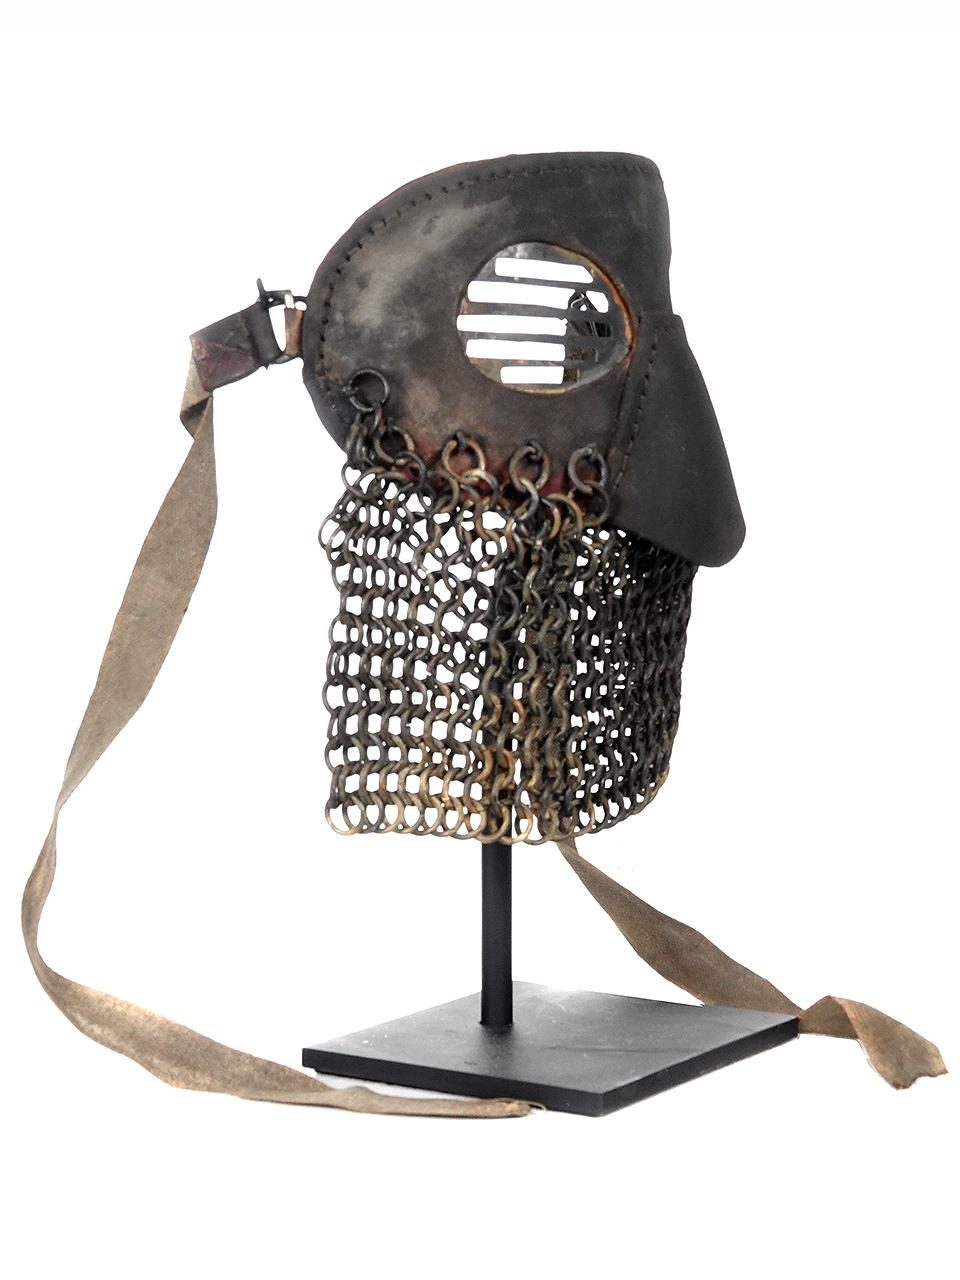 Europe, England, World War I era, ca. 1917 to 1918. Fascinating piece of militaria created to protect the crew of the earliest tanks that rolled onto the WWI battlefields of France and Belgium in 1917. Called a splatter or splinter mask, this